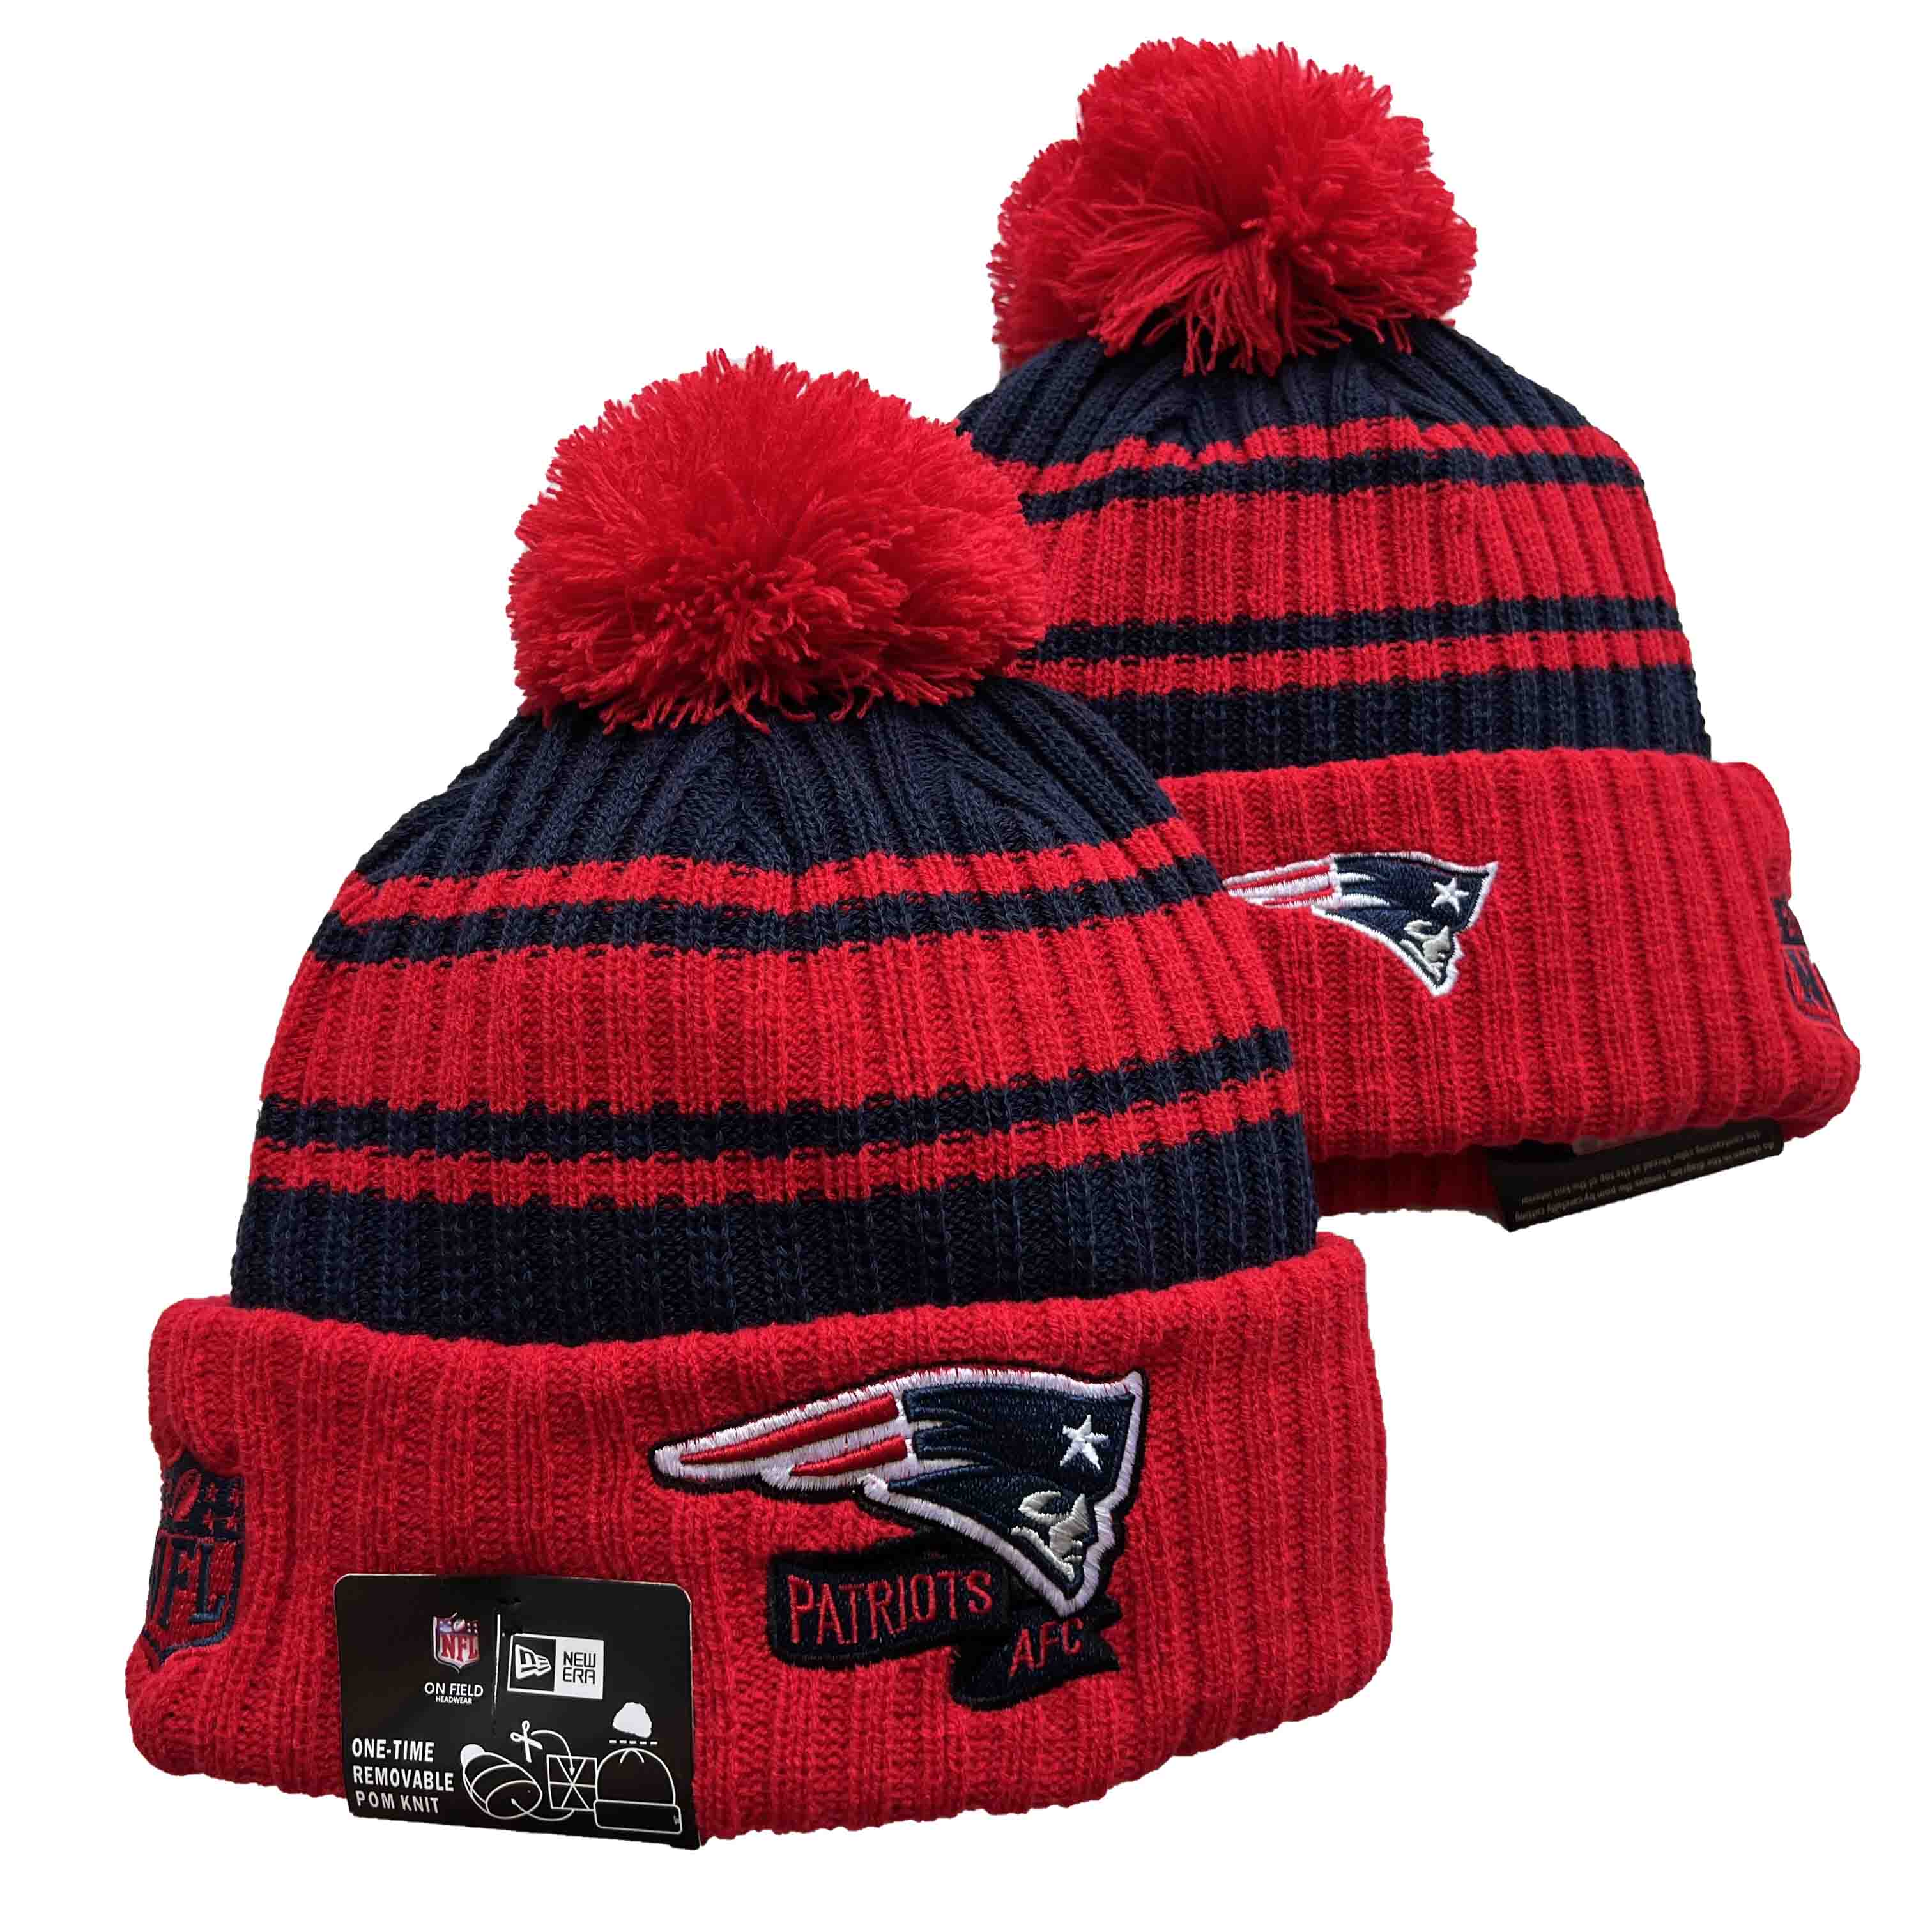 NFL New England Patriots Beanies Knit Hats-YD1252